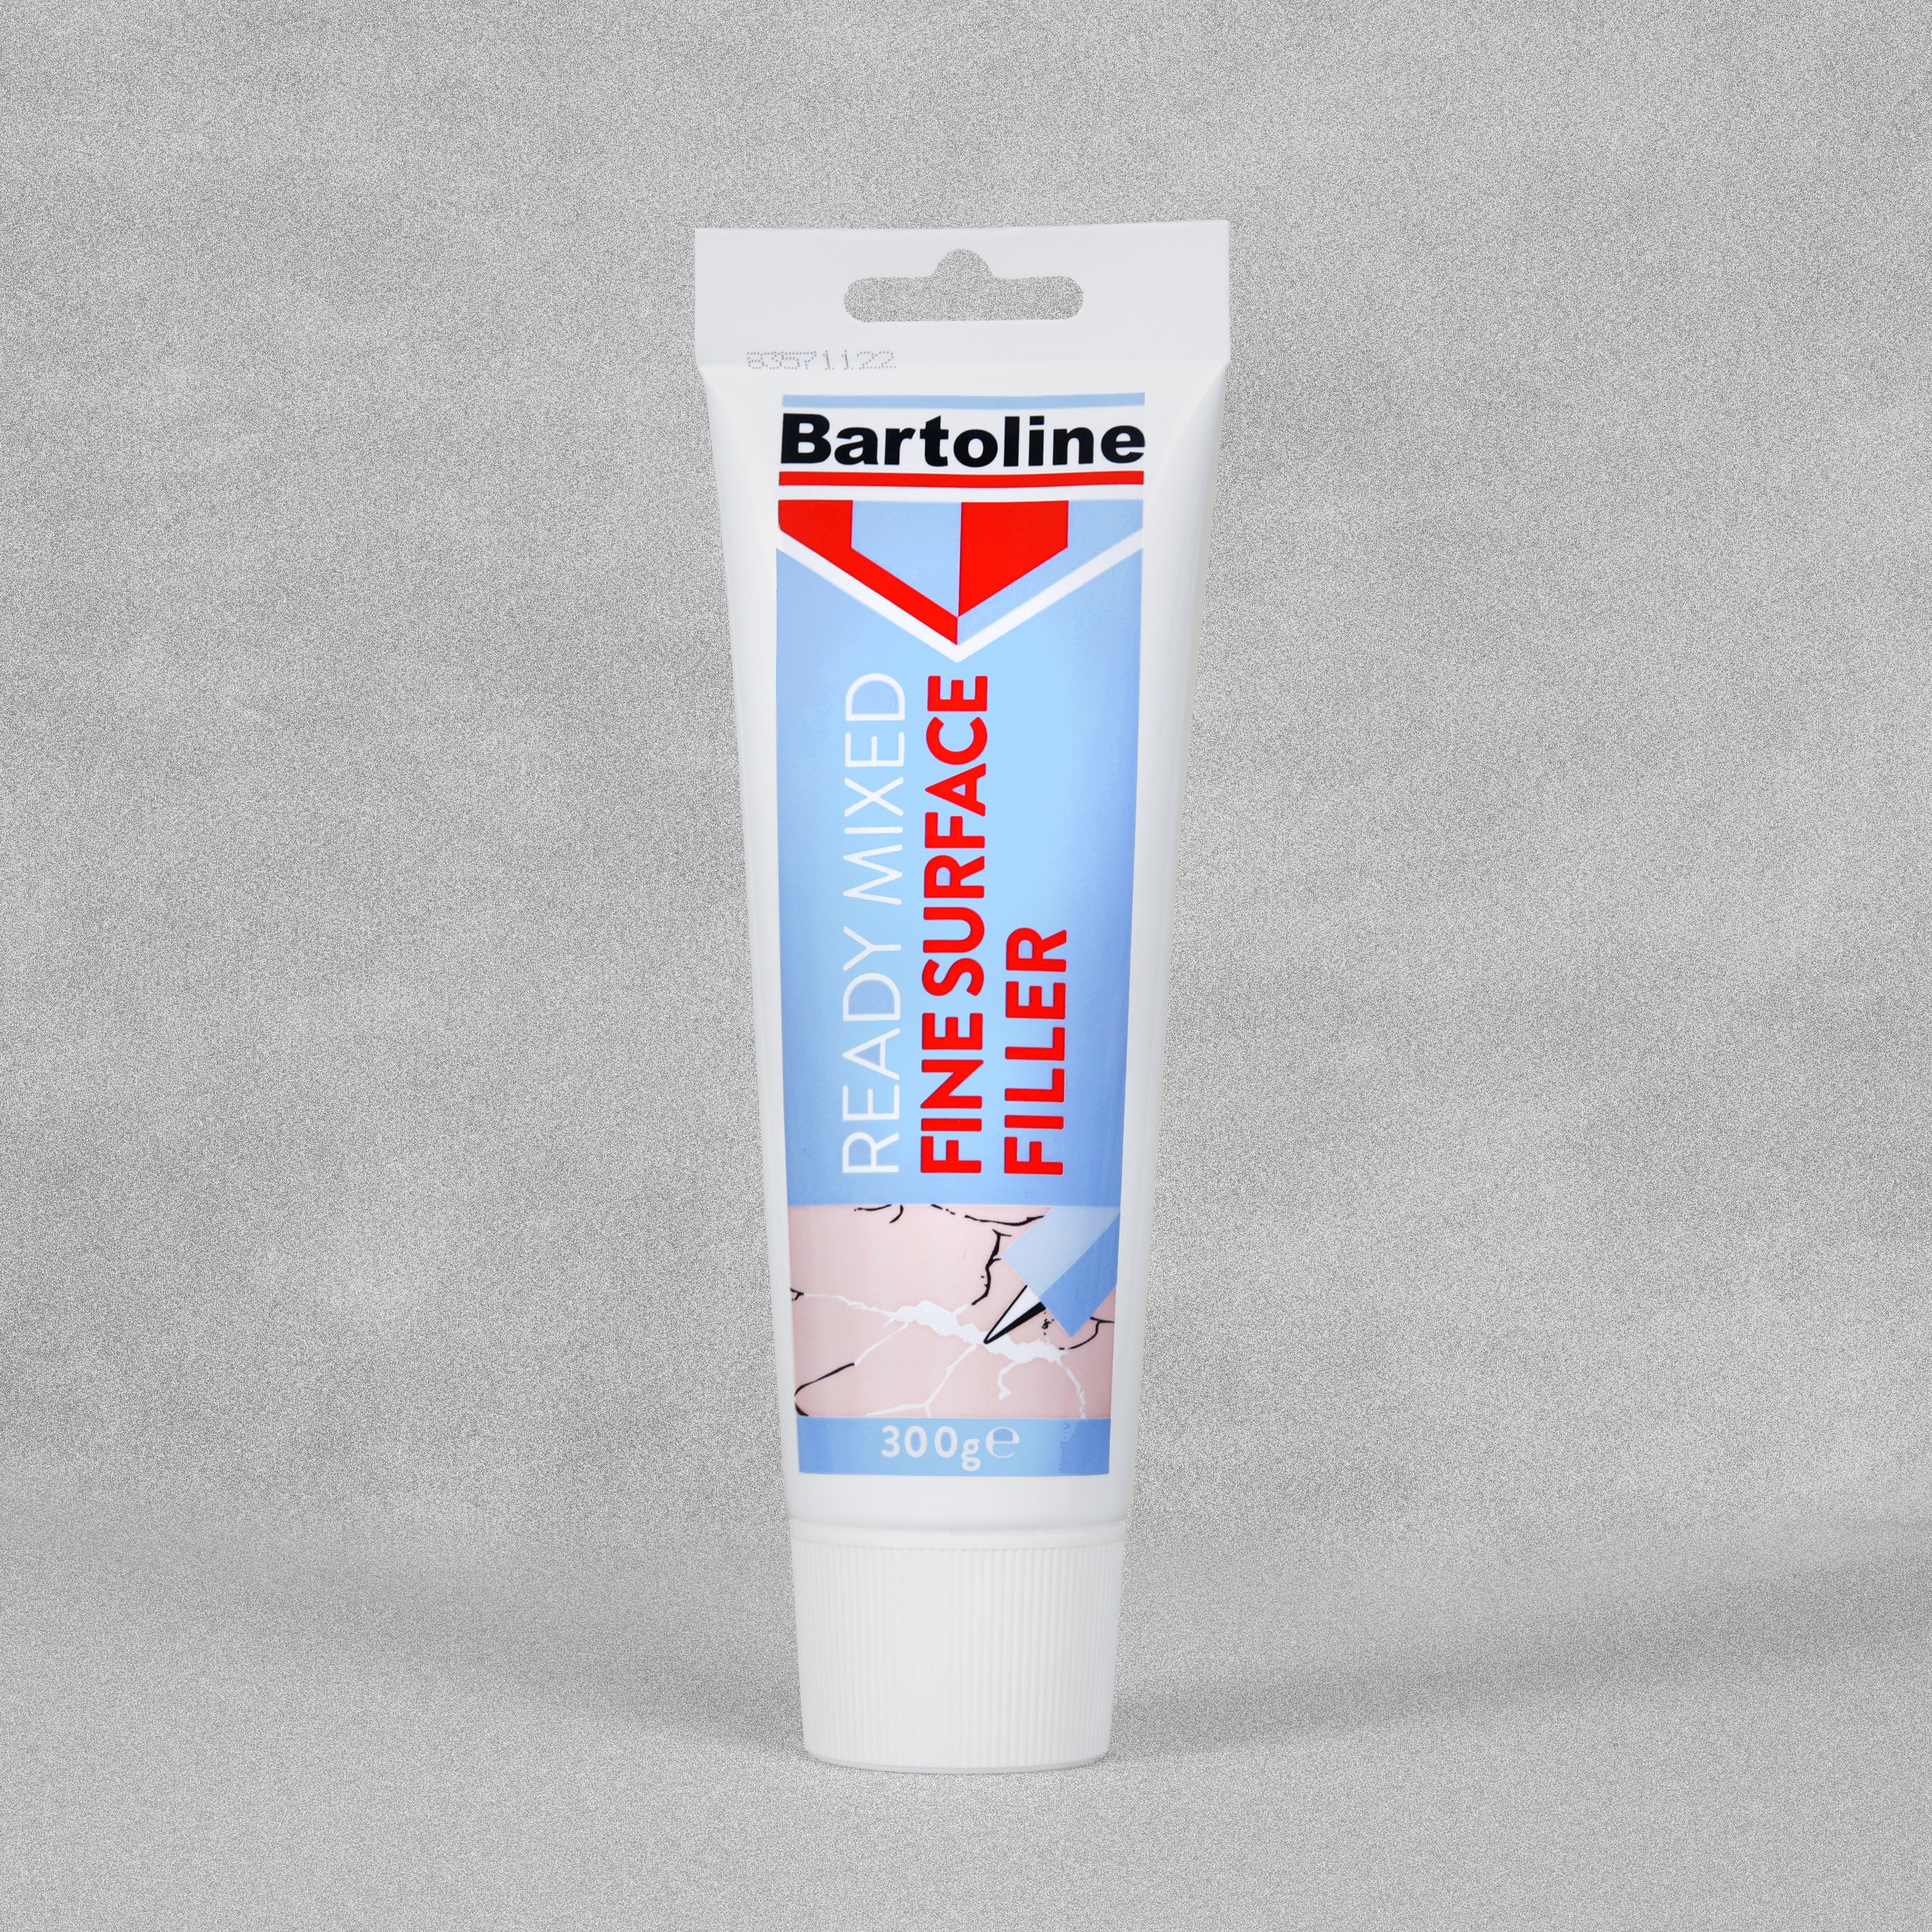 Bartoline Ready Mixed Fine Surface White Smooth Filler - 300g